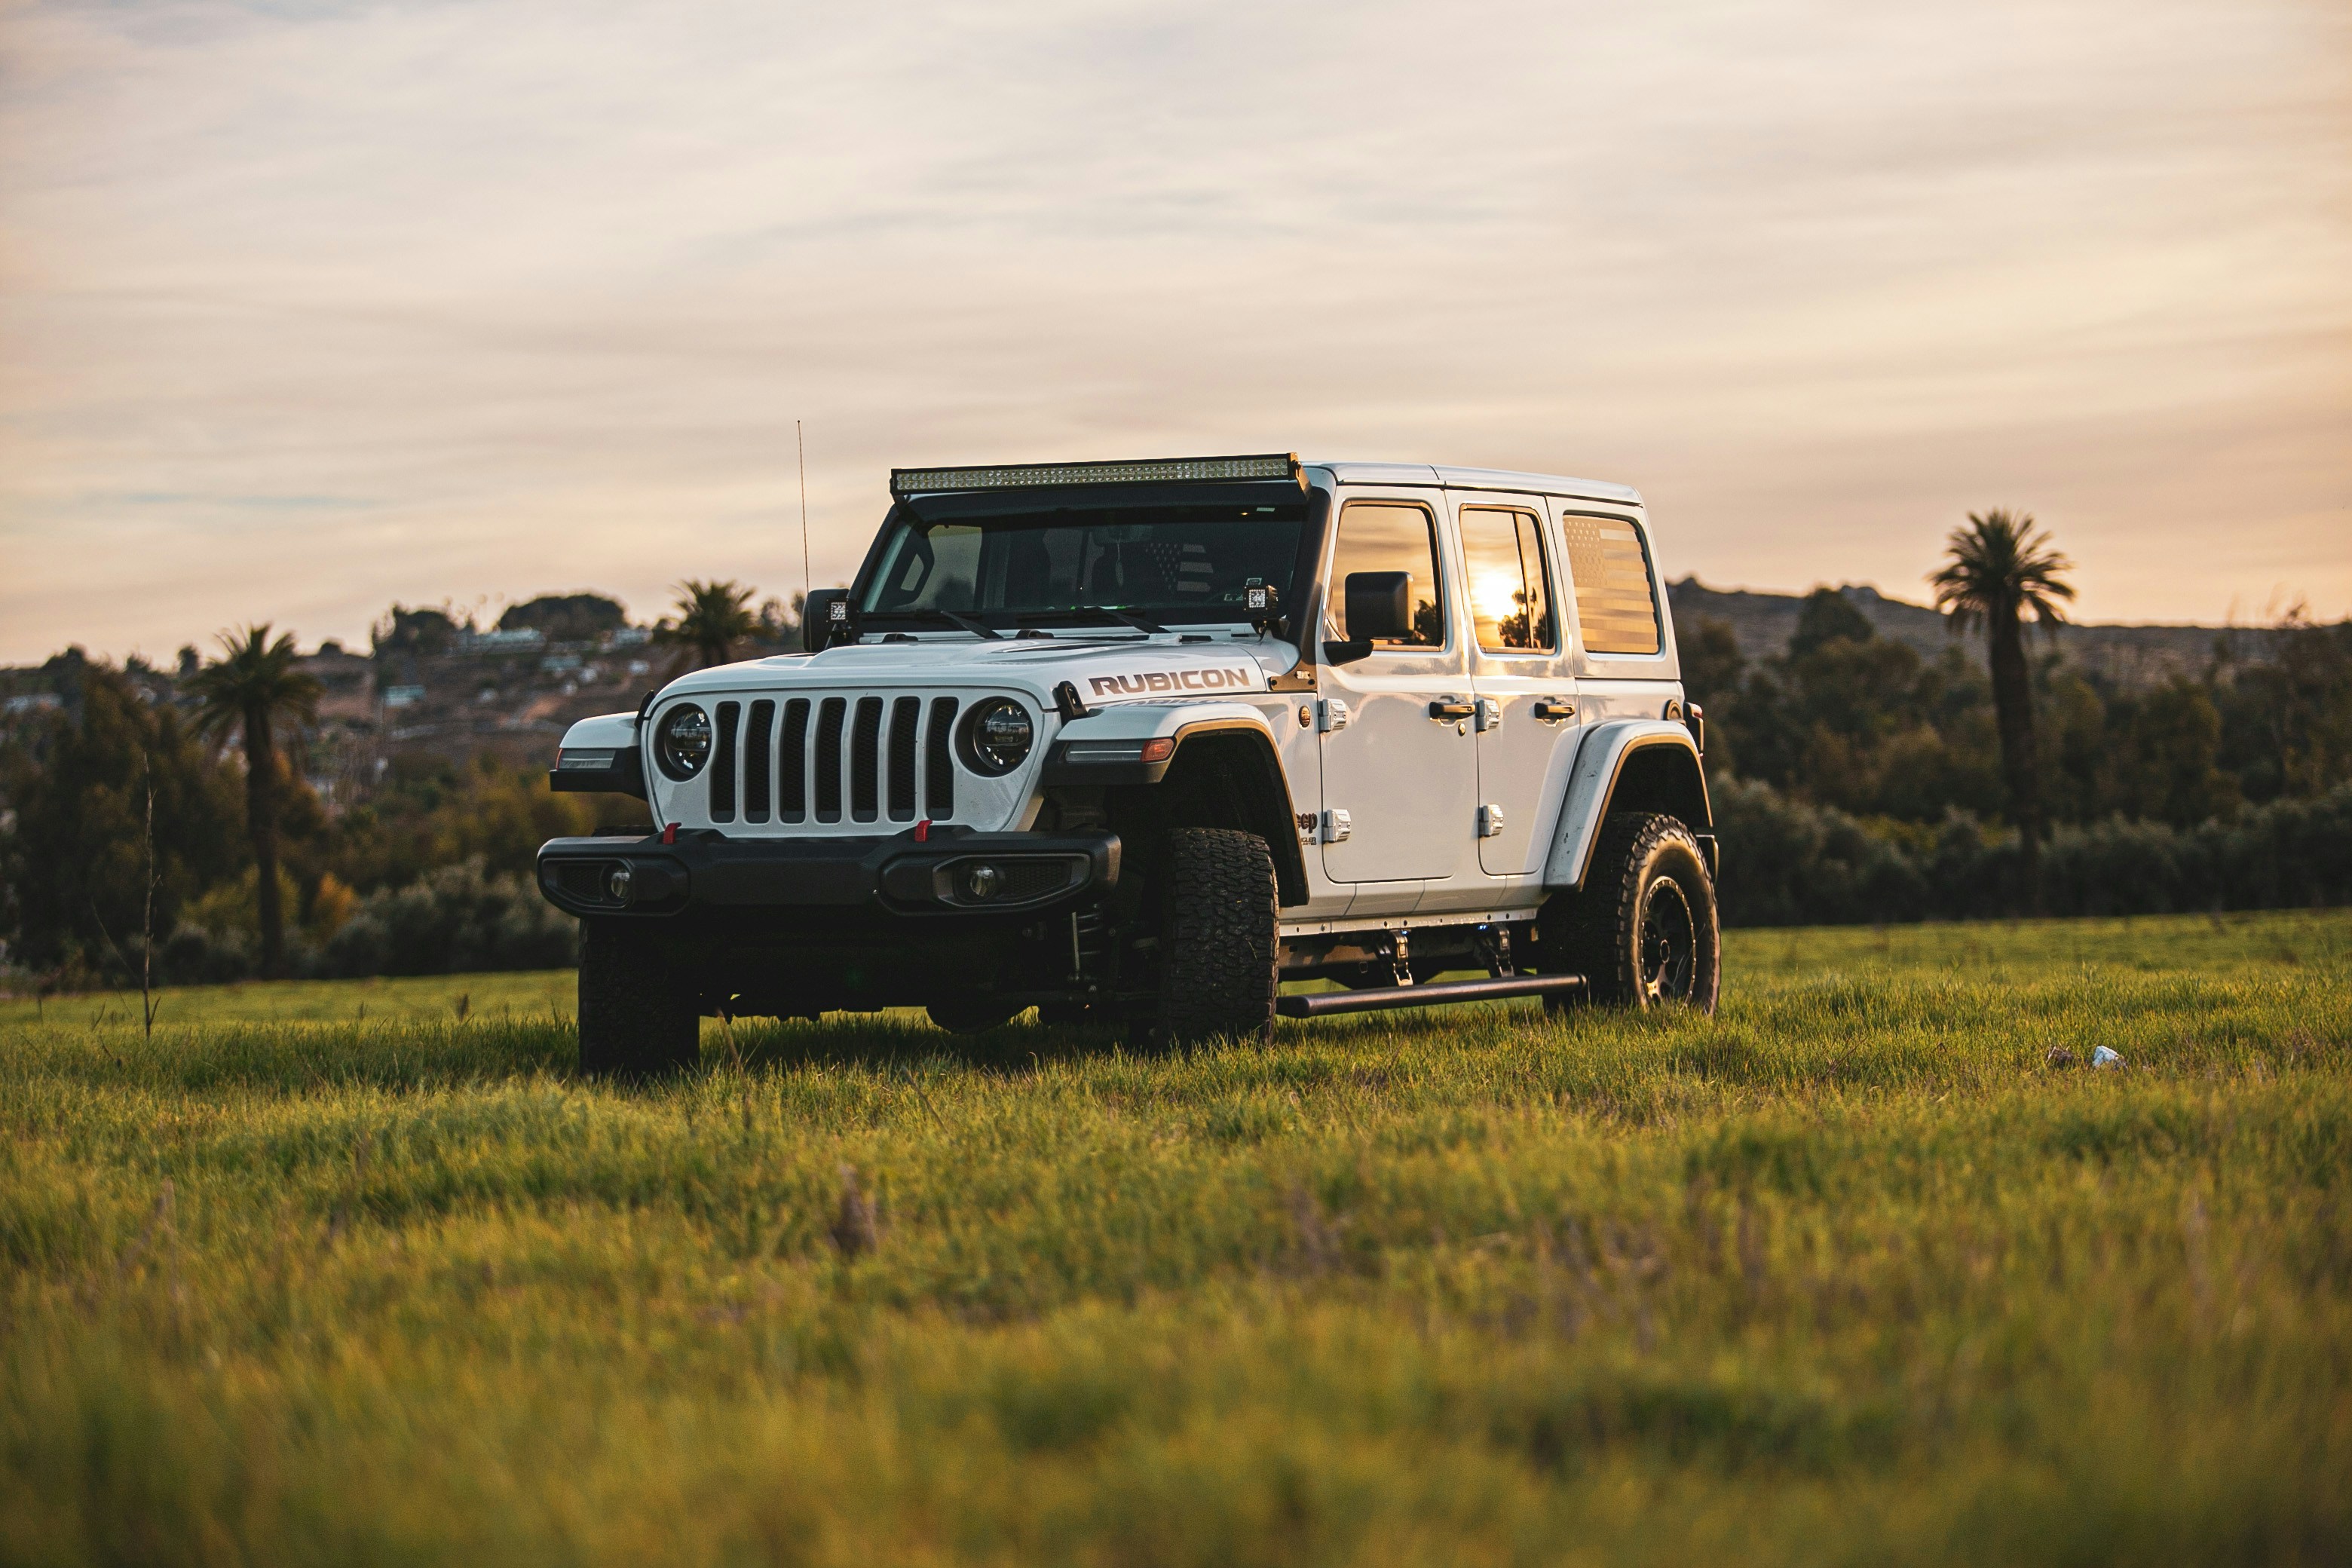 Jeep Wrangler Factory Touch Screen Radio: A Must-Have for Every Off-Road Adventure